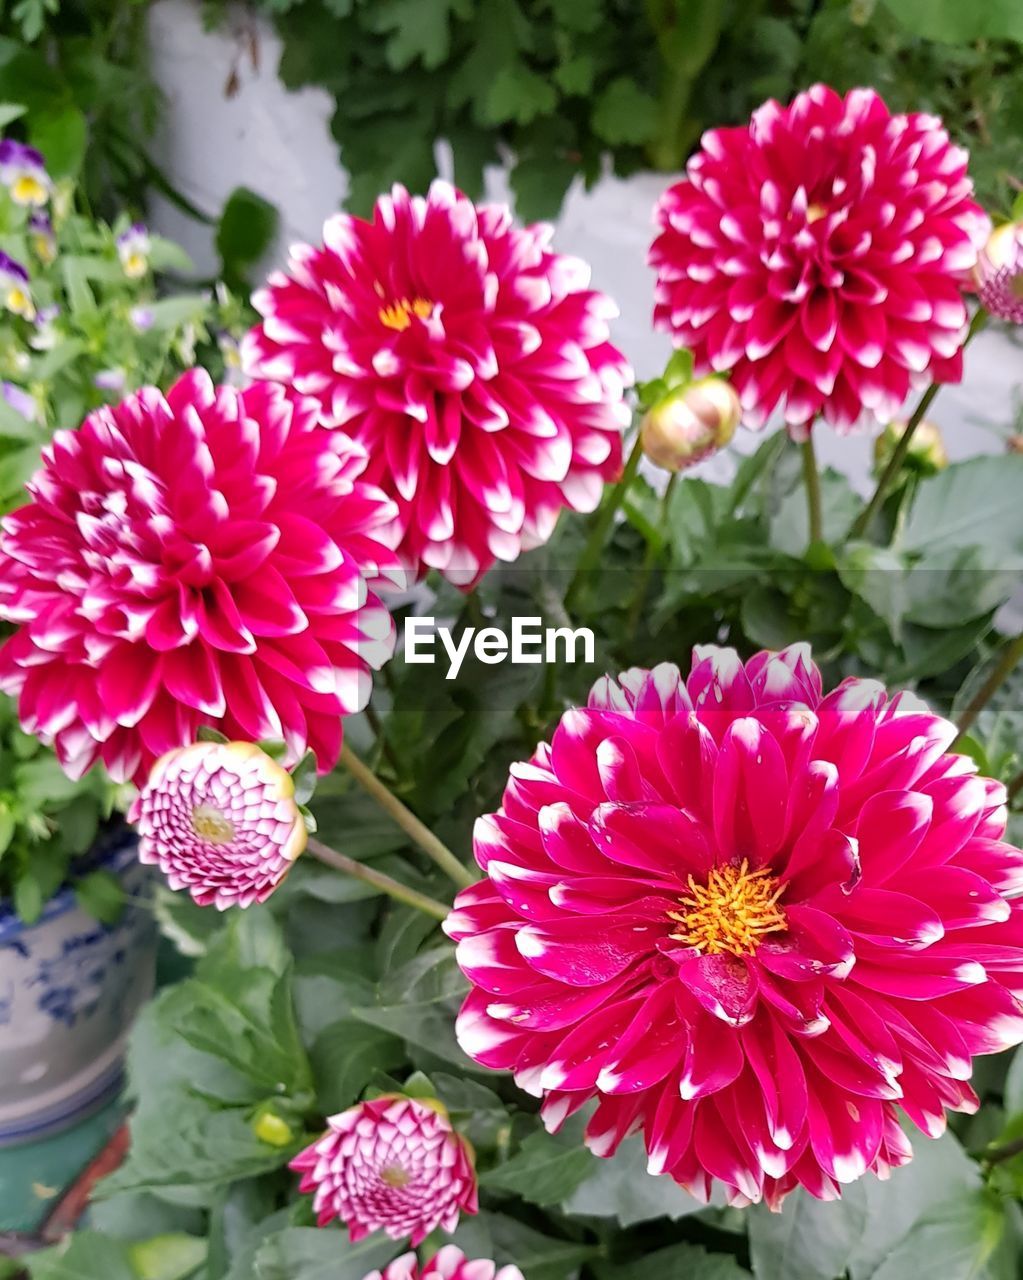 flower, flowering plant, plant, freshness, beauty in nature, fragility, petal, flower head, inflorescence, growth, close-up, pink, nature, dahlia, plant part, leaf, no people, day, outdoors, botany, focus on foreground, red, high angle view, pollen, springtime